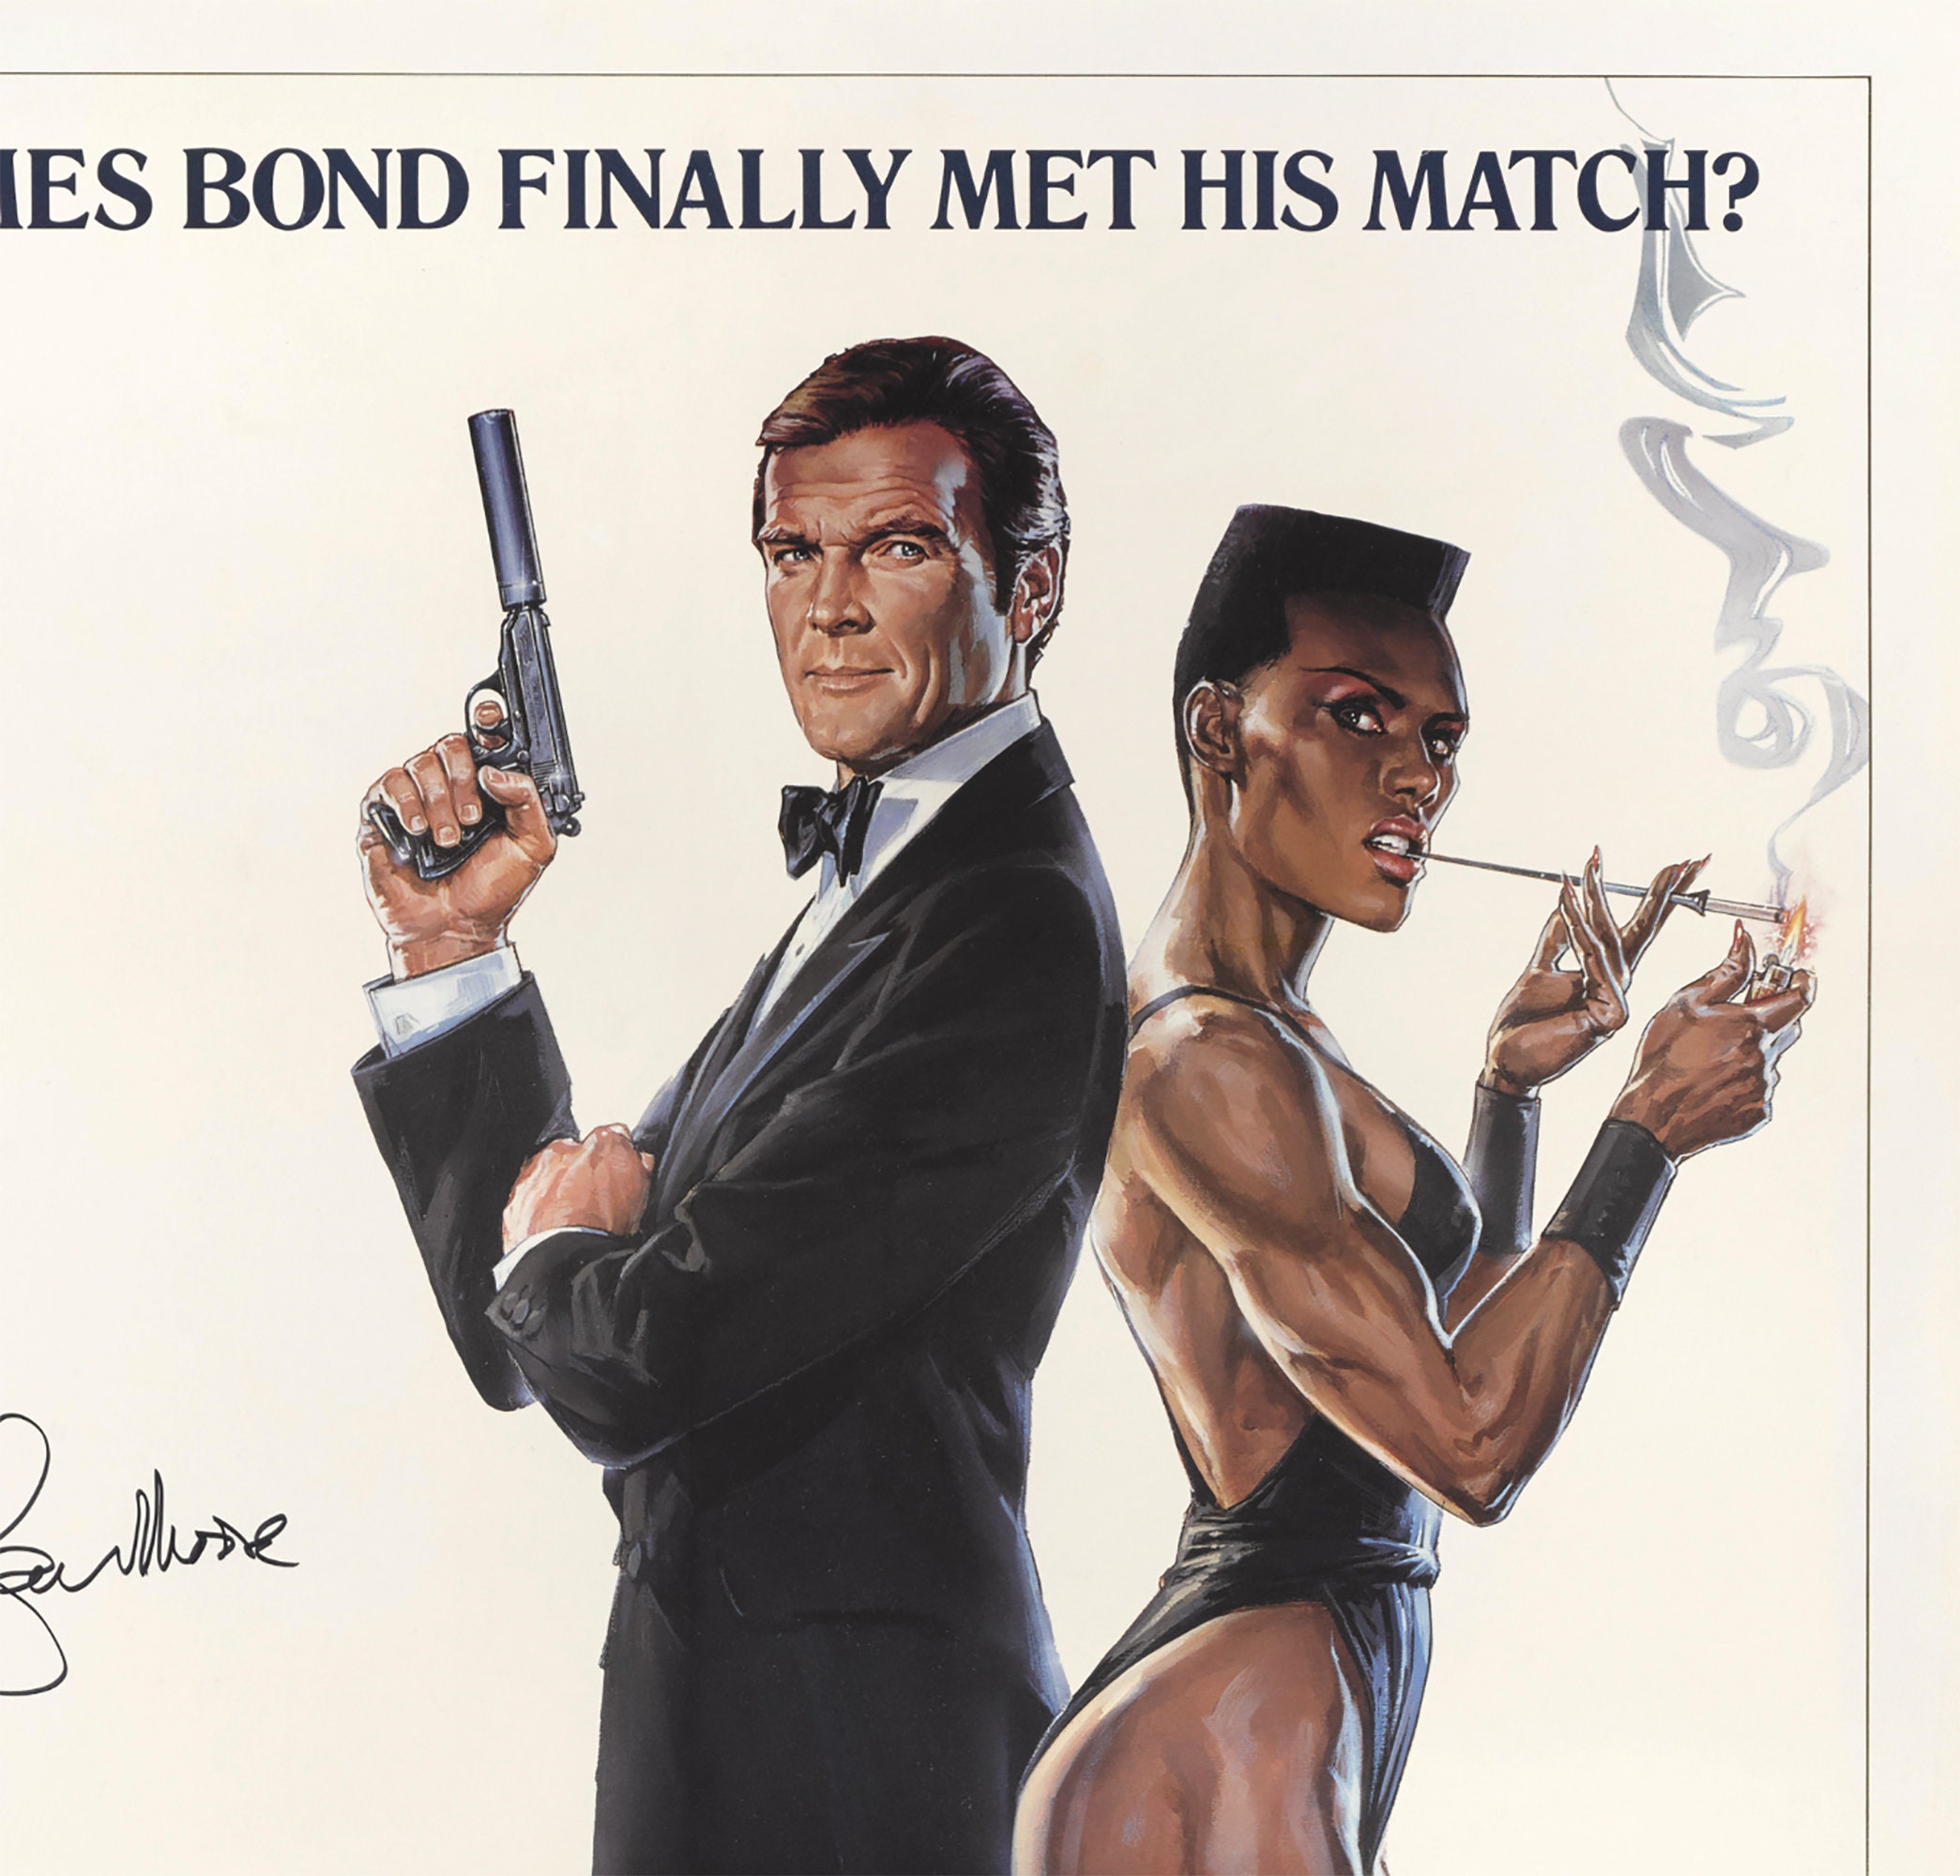 A View to a Kill (1985) Film Poster, James Bond Poster, Film Advertising Poster, Movie Poster